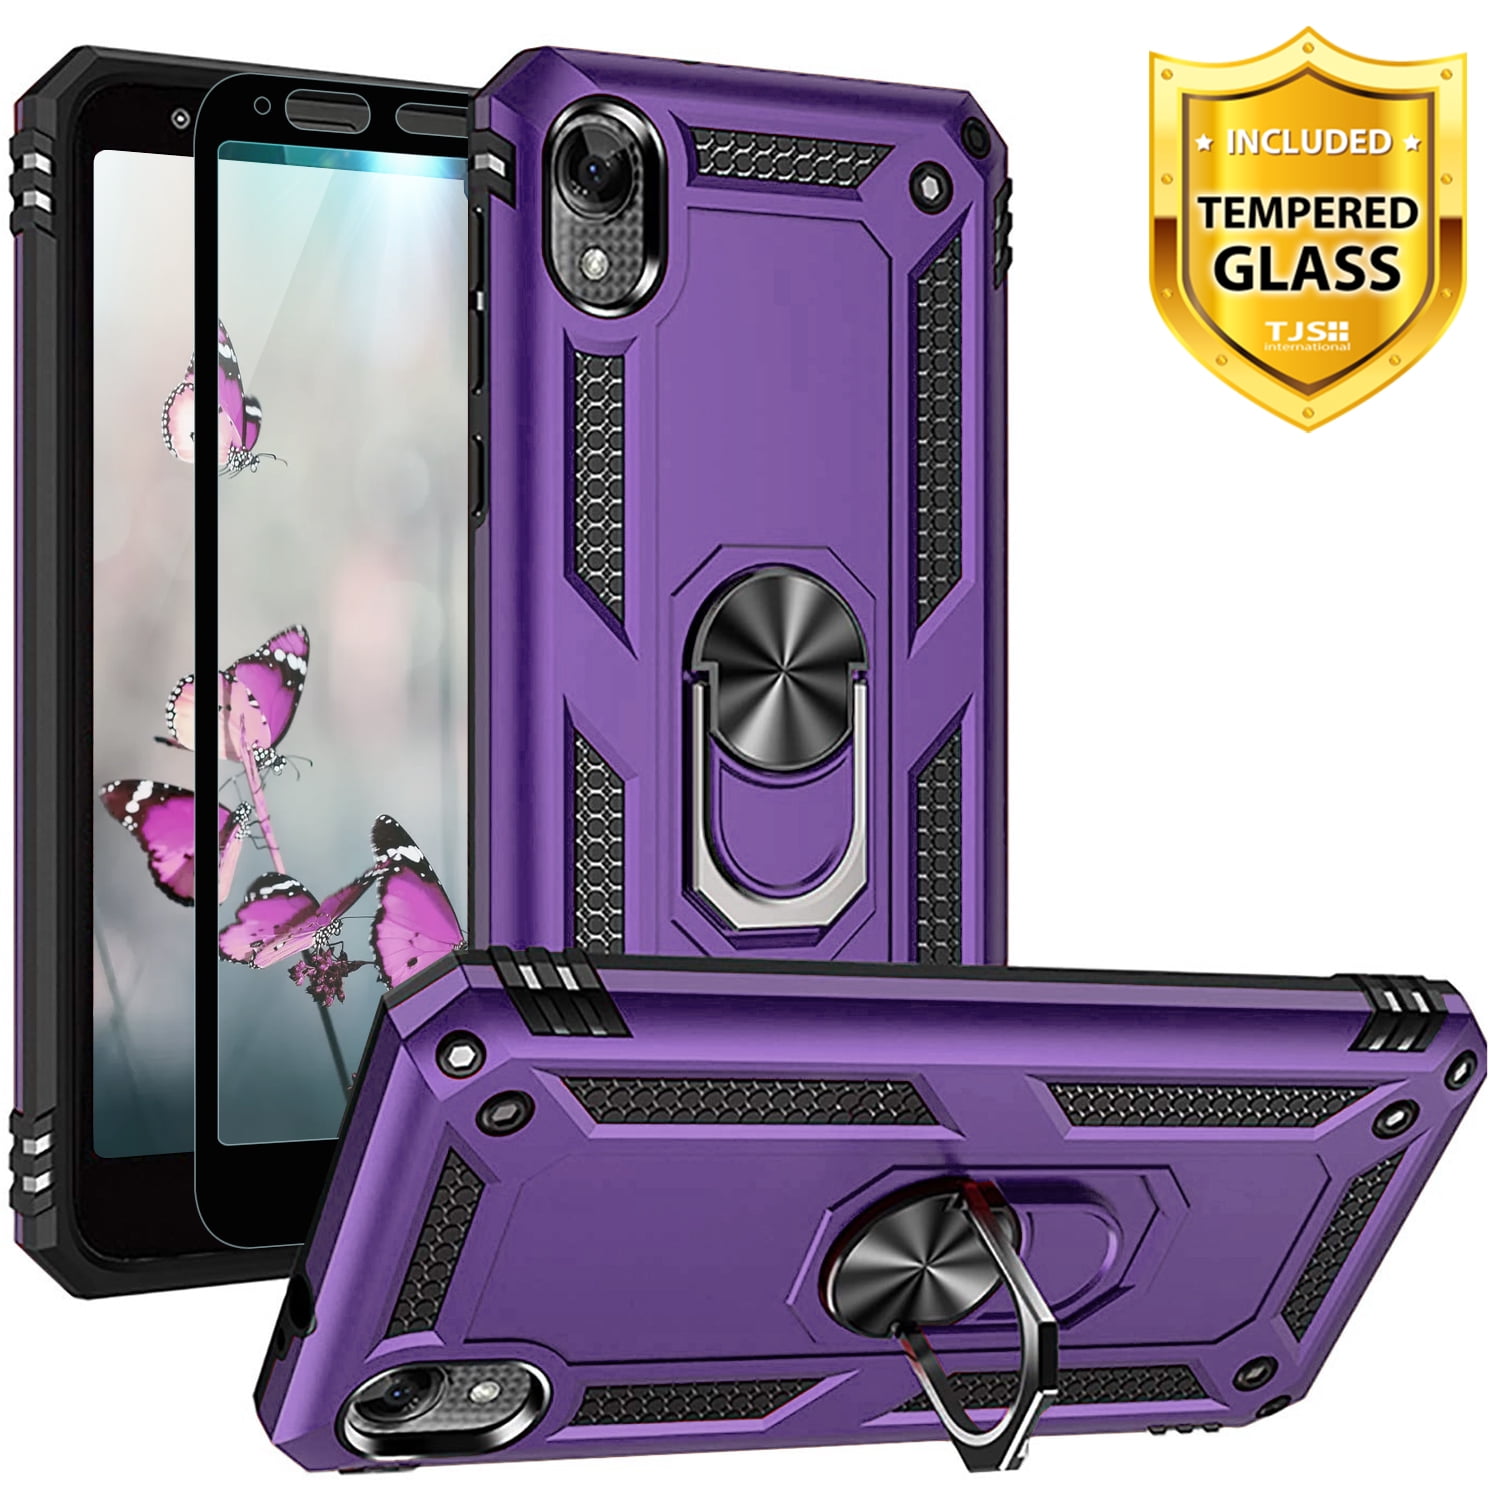 TJS Phone Case for Motorola Moto E6, [Full Coverage Tempered Glass Screen Protector][Impact Resistant][Defender][Metal Ring][Magnetic][Support] Heavy Duty Armor Phone Cover (Purple)